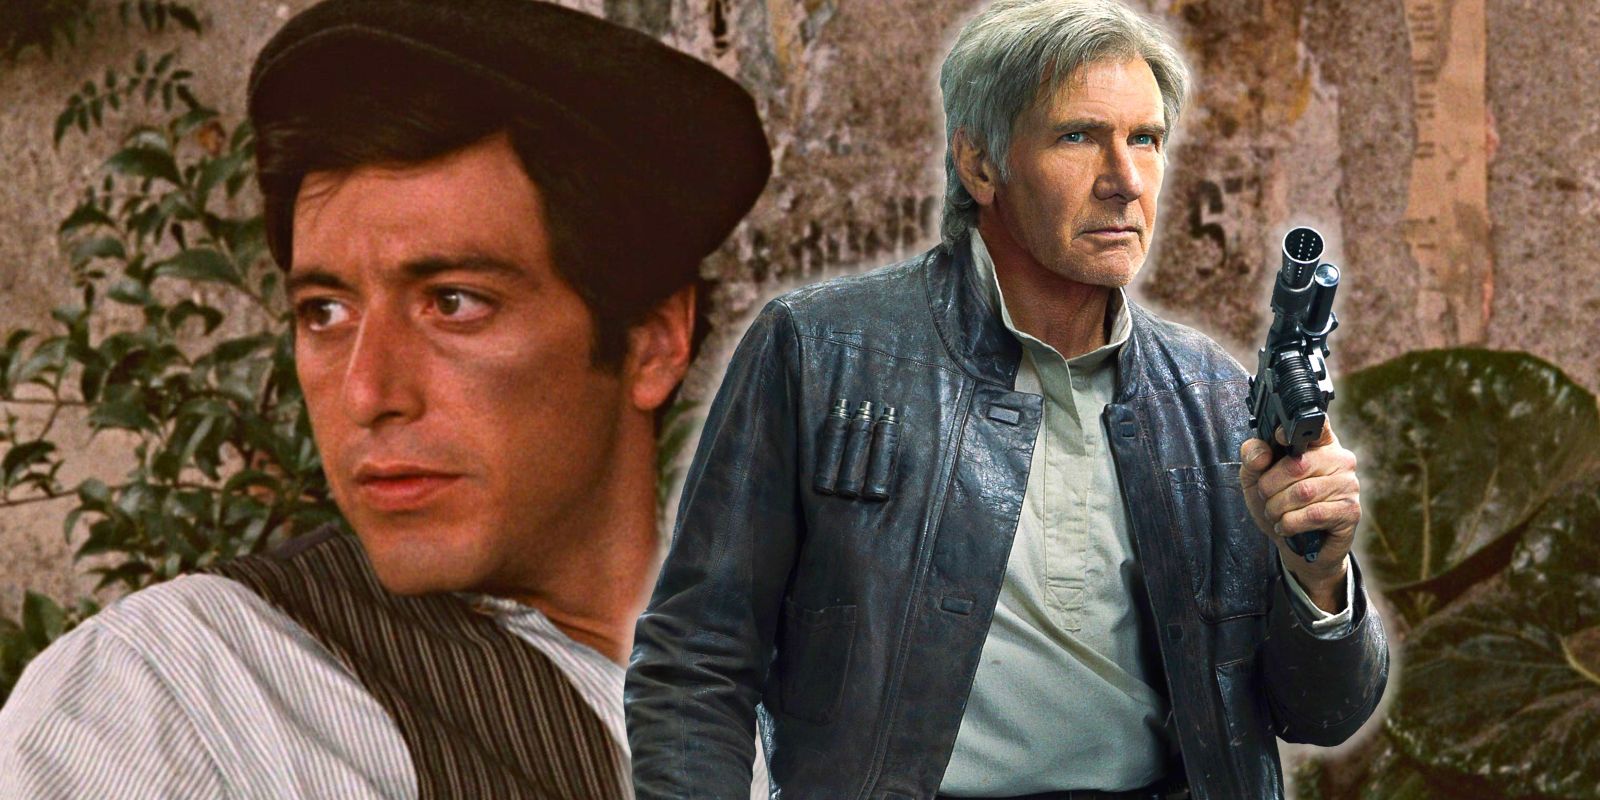 A young Al Pacino looks concerned next to a stoic grey-haired Han Solo 